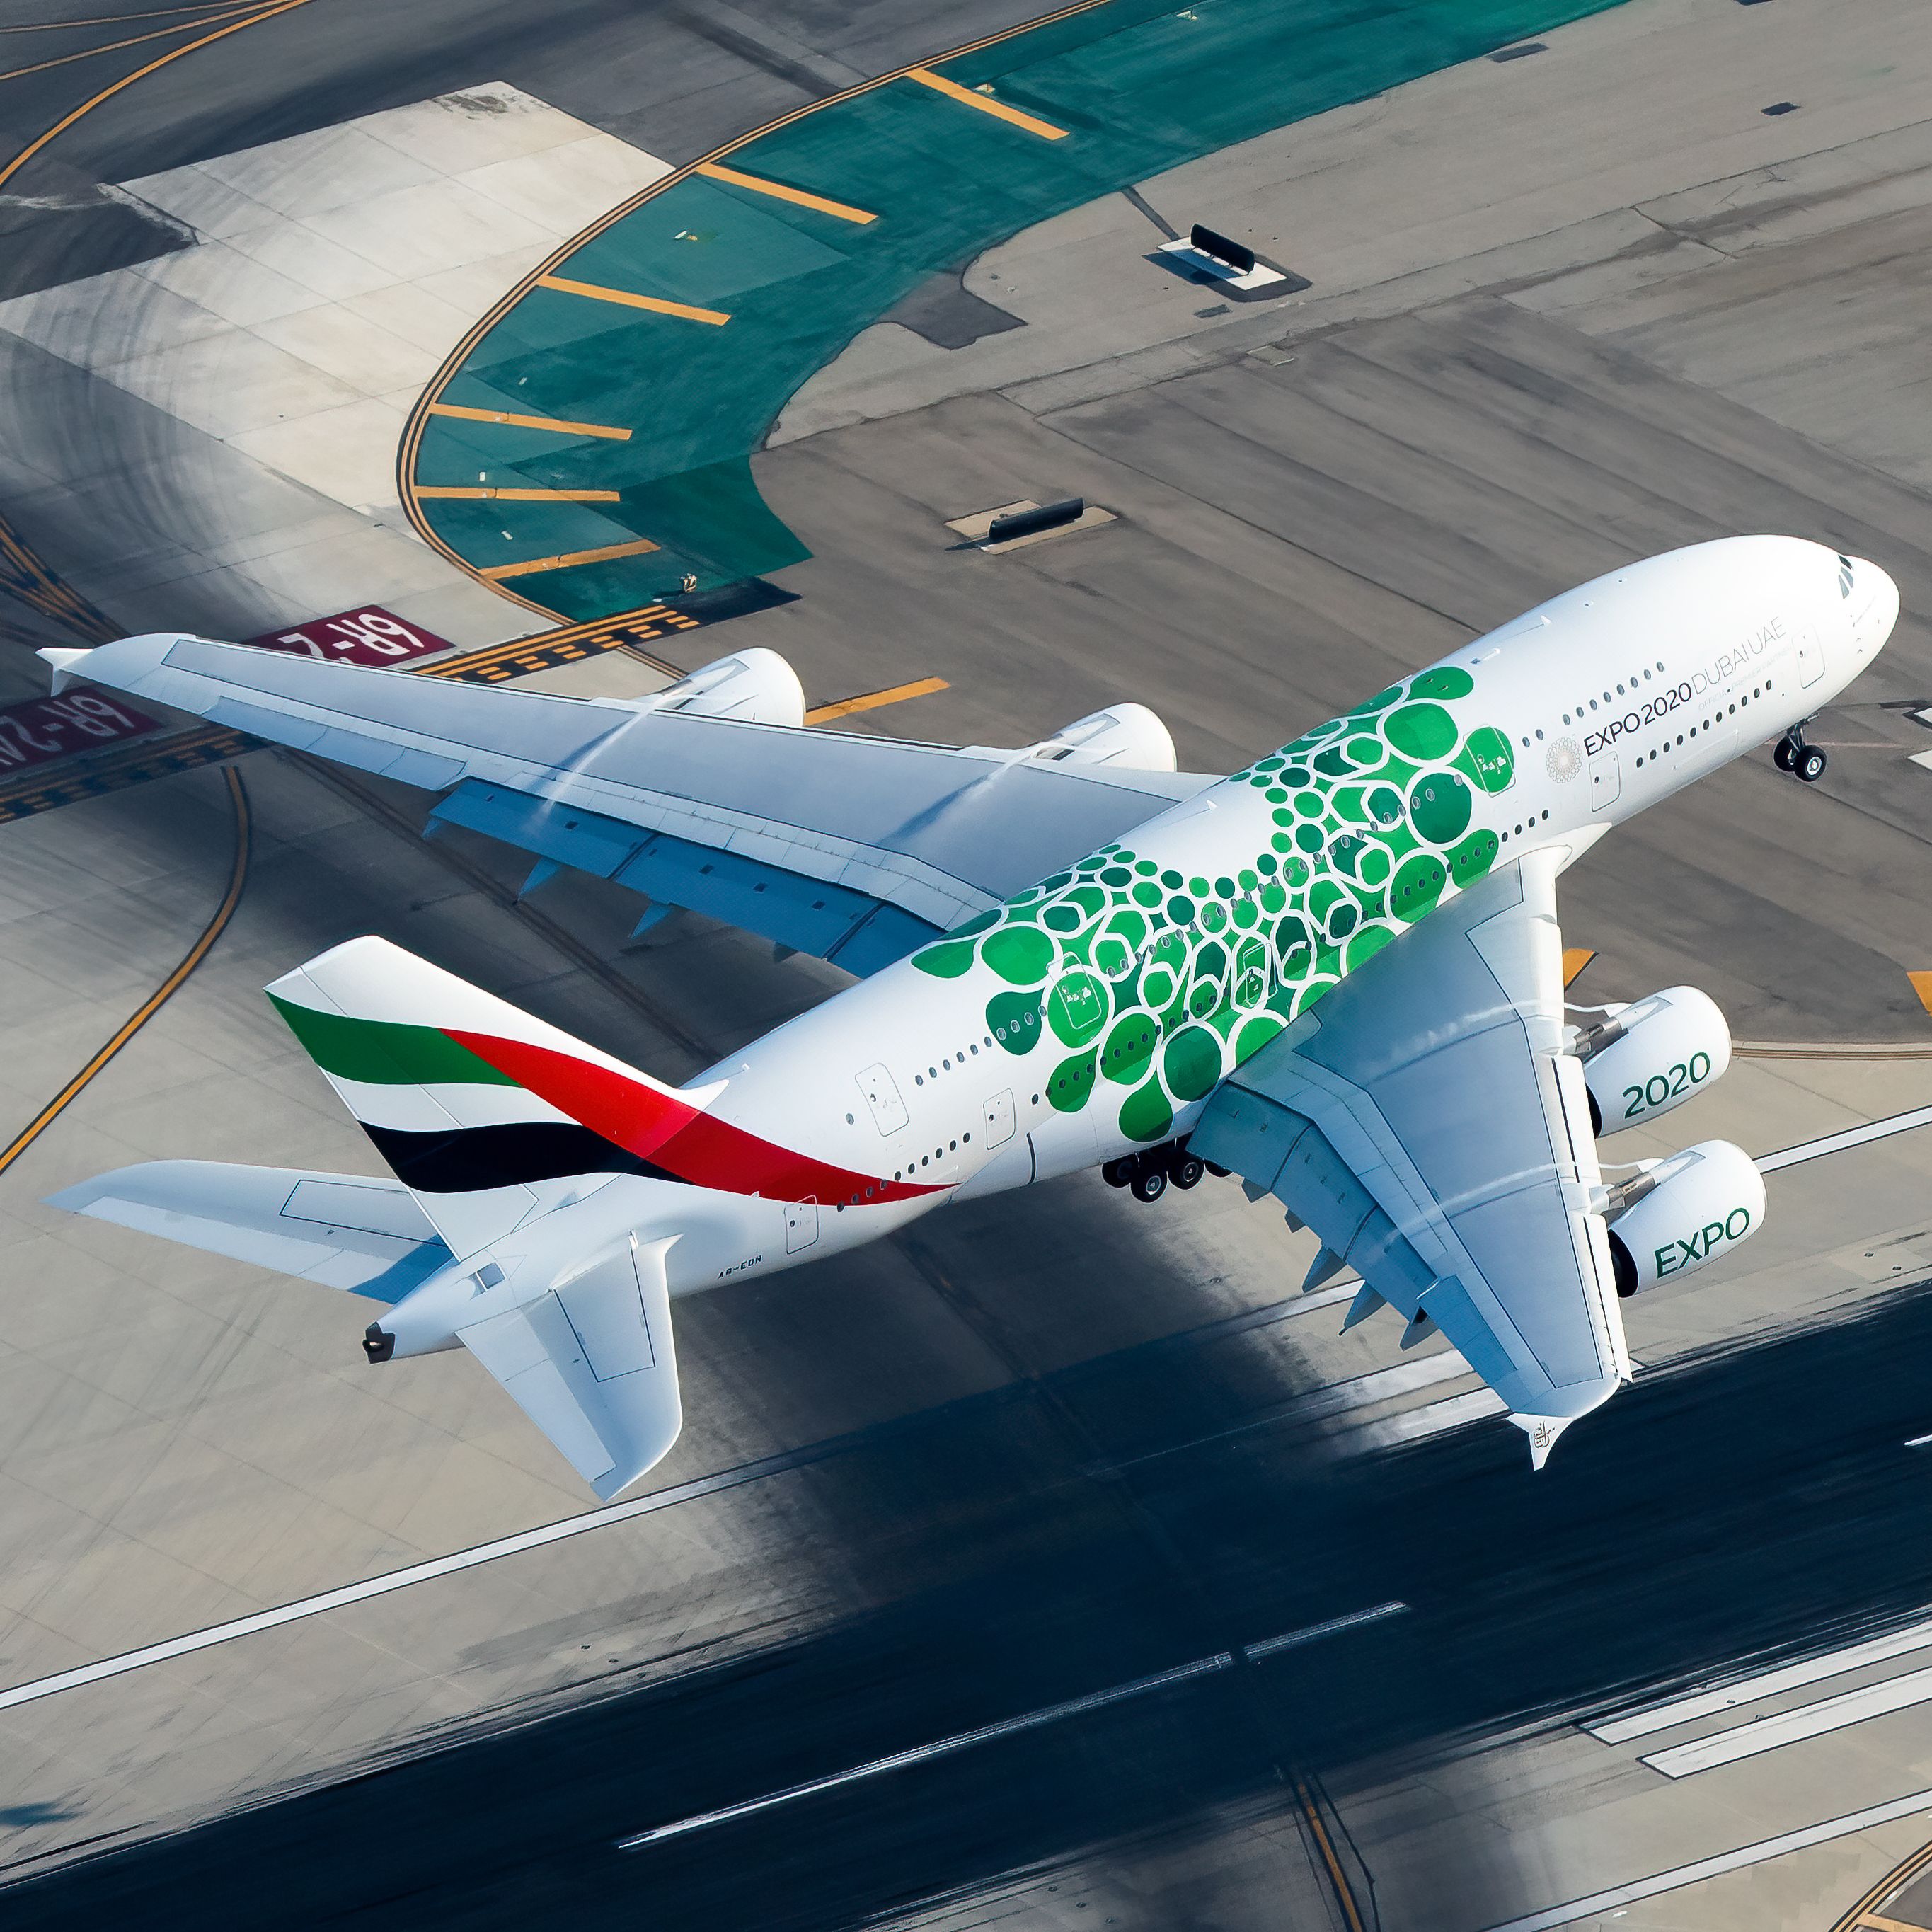 Emirates Airbus A380 with green expo livery